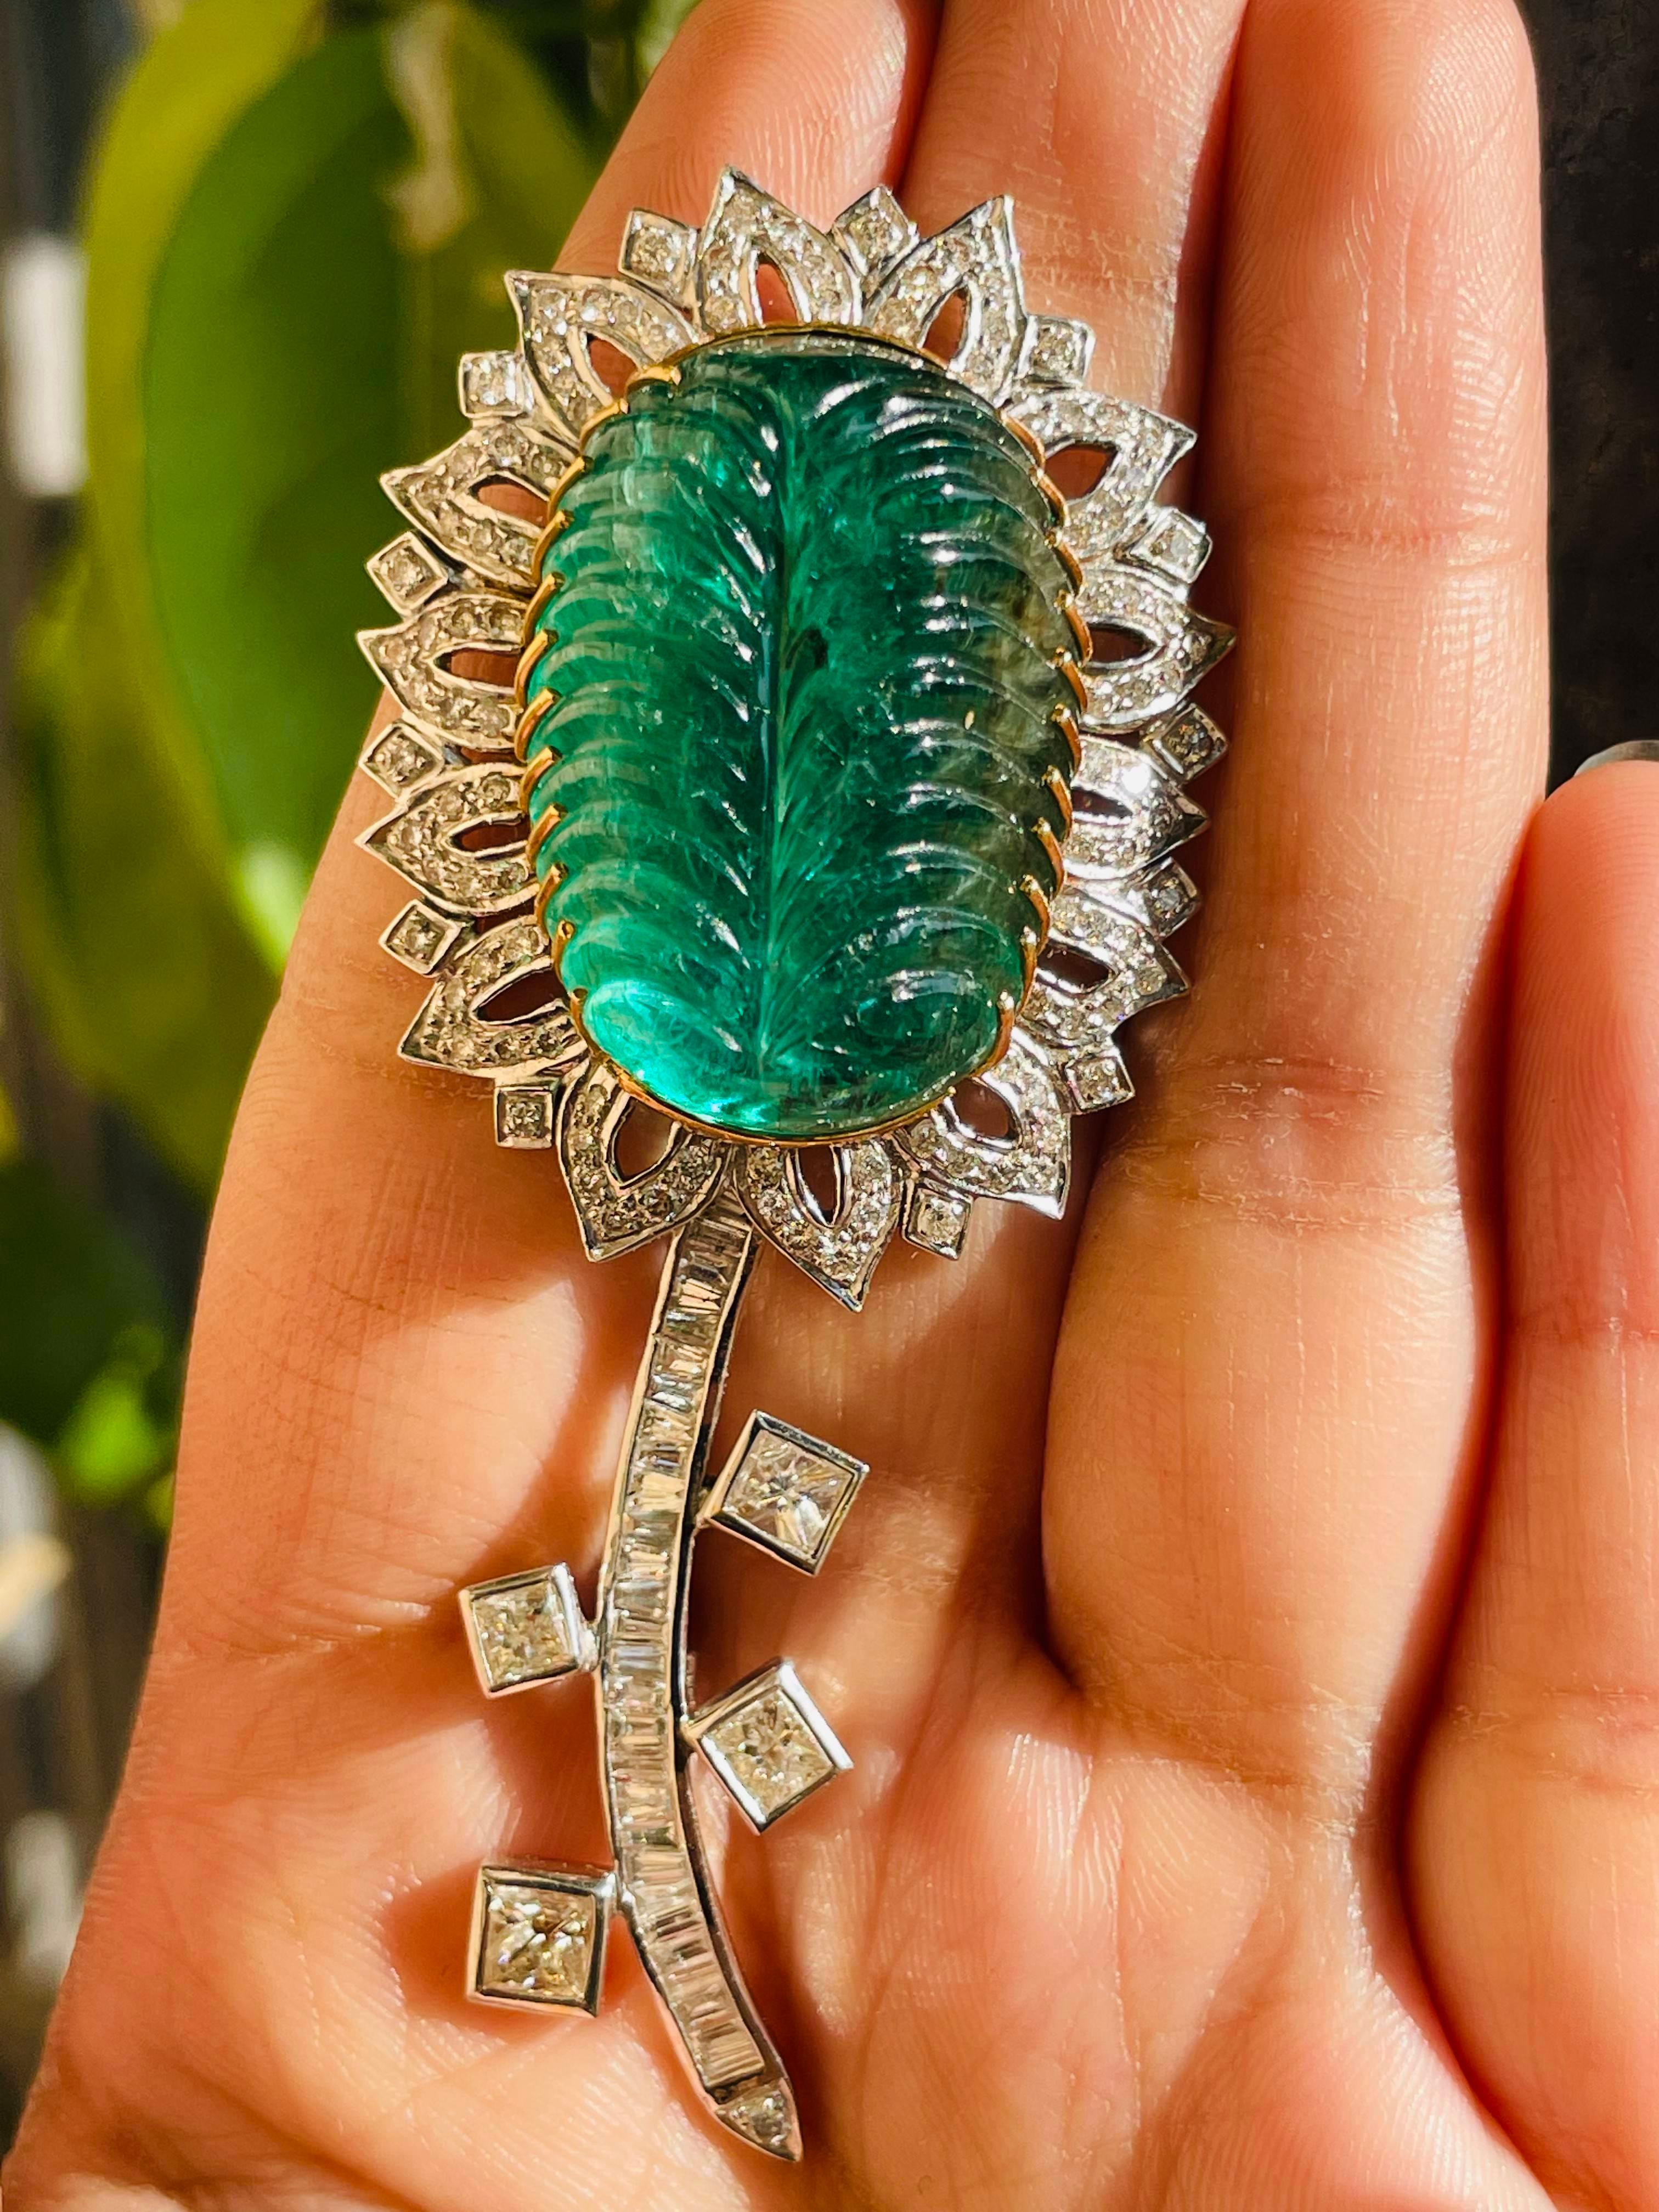 55 Carats Emerald Diamond Floral Brooch Made in 18k Gold which is a fusion of surrealism and pop-art, designed to make a bold statement. Crafted with love and attention to detail, this features 55 carats of emerald which makes you stand out of the